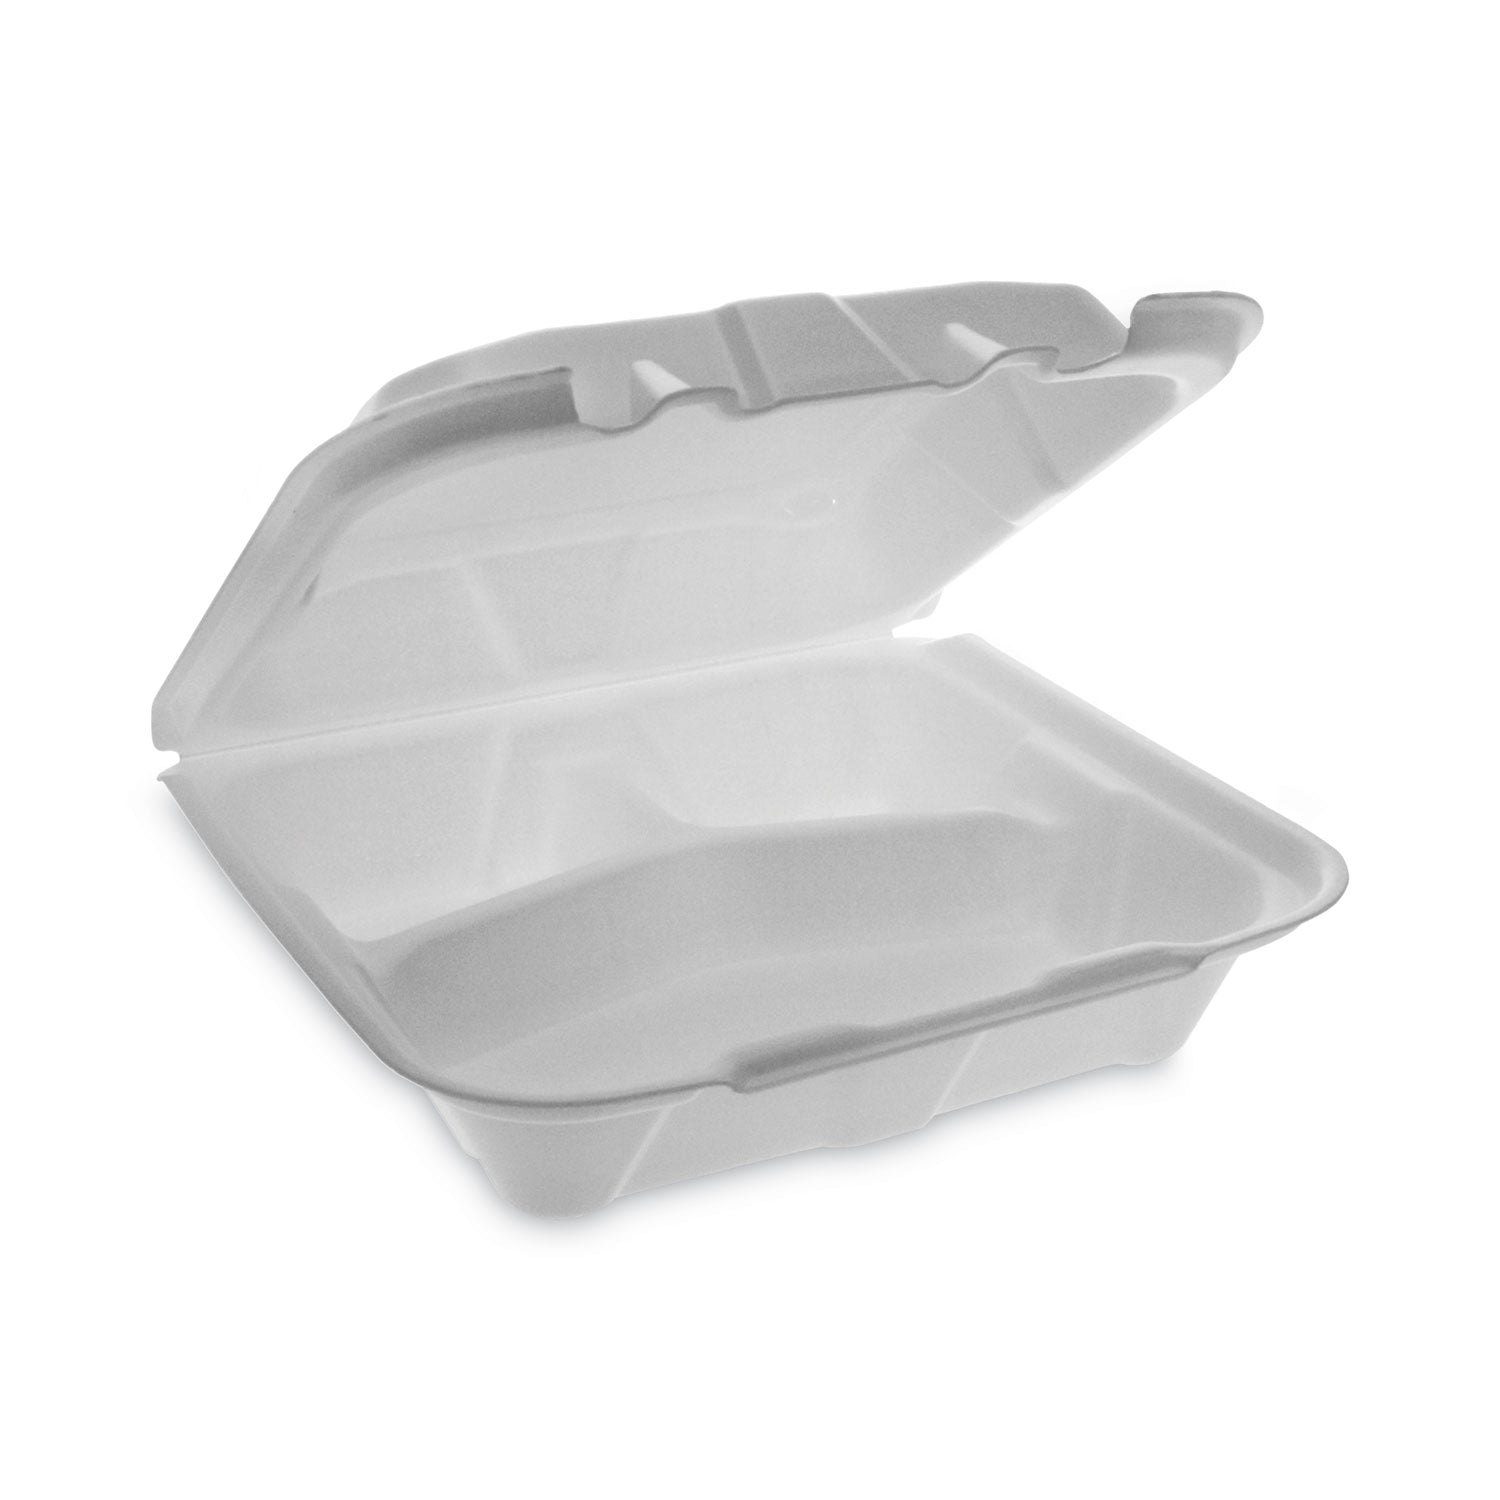 vented-foam-hinged-lid-container-dual-tab-lock-economy-3-compartment-842-x-815-x-3-white-150-carton_pctytd18803econ - 1